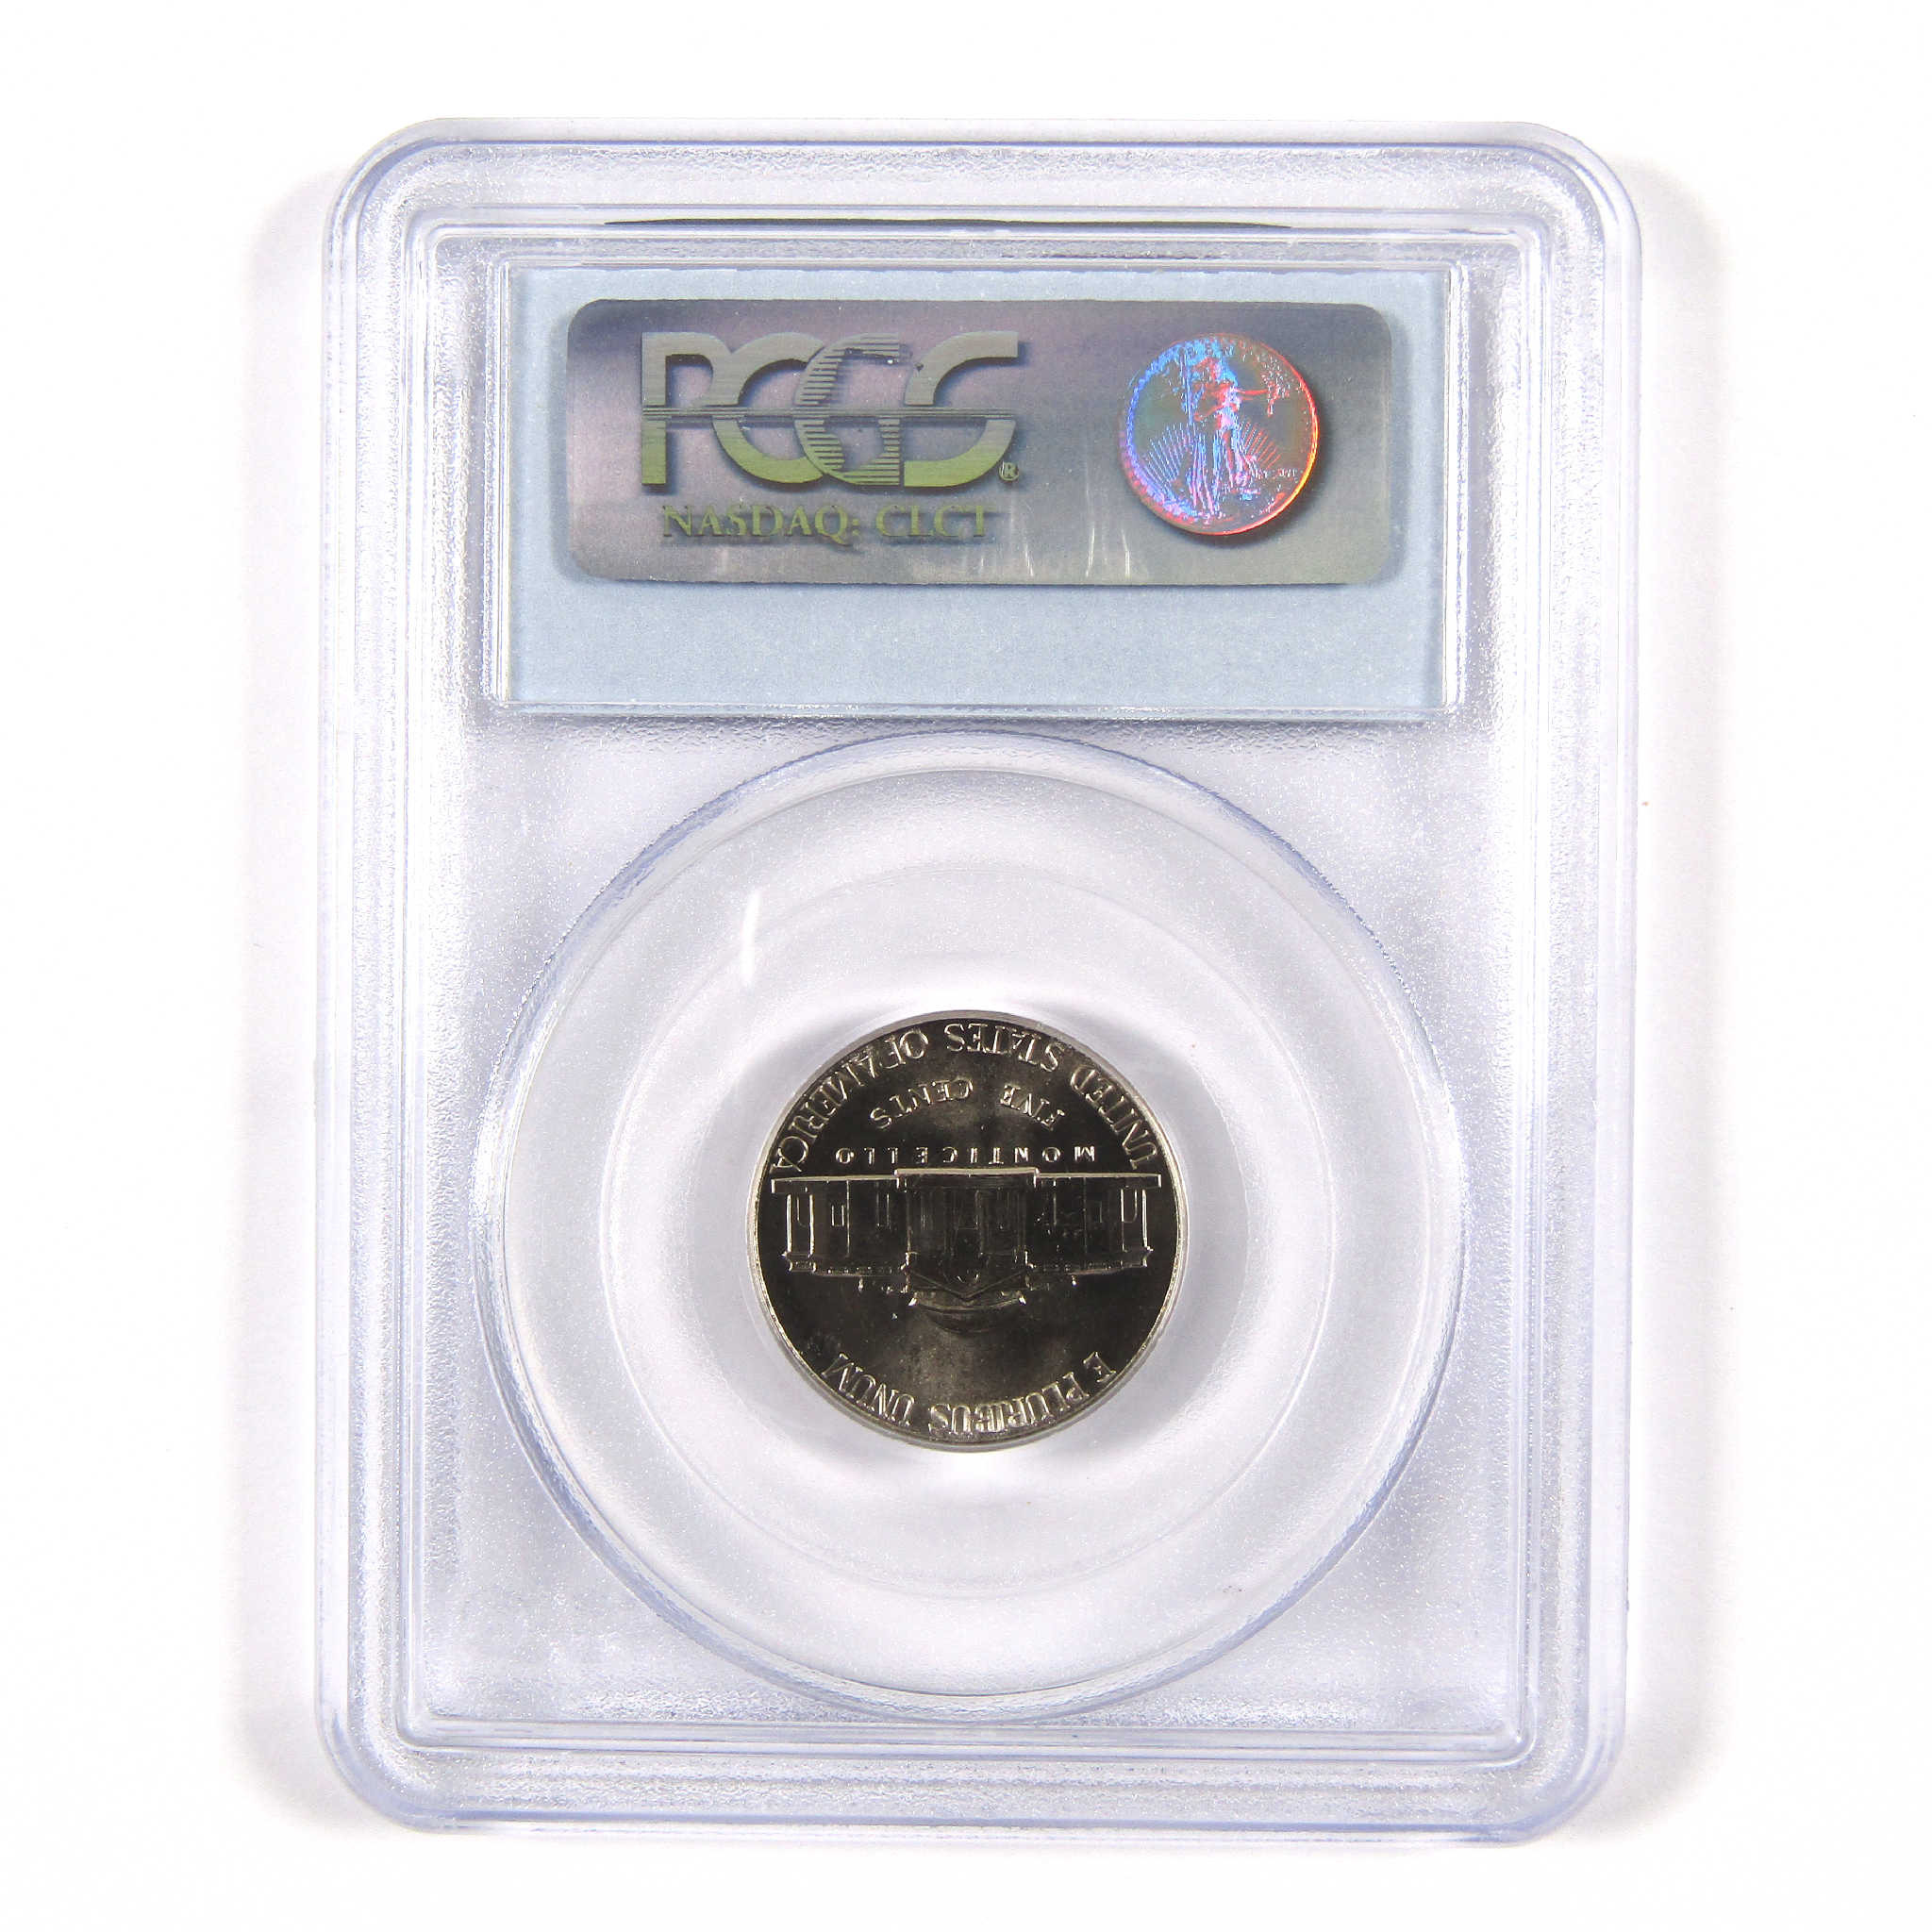 1992 P Jefferson Nickel MS 65 FS PCGS 5c Uncirculated Coin SKU:CPC4125